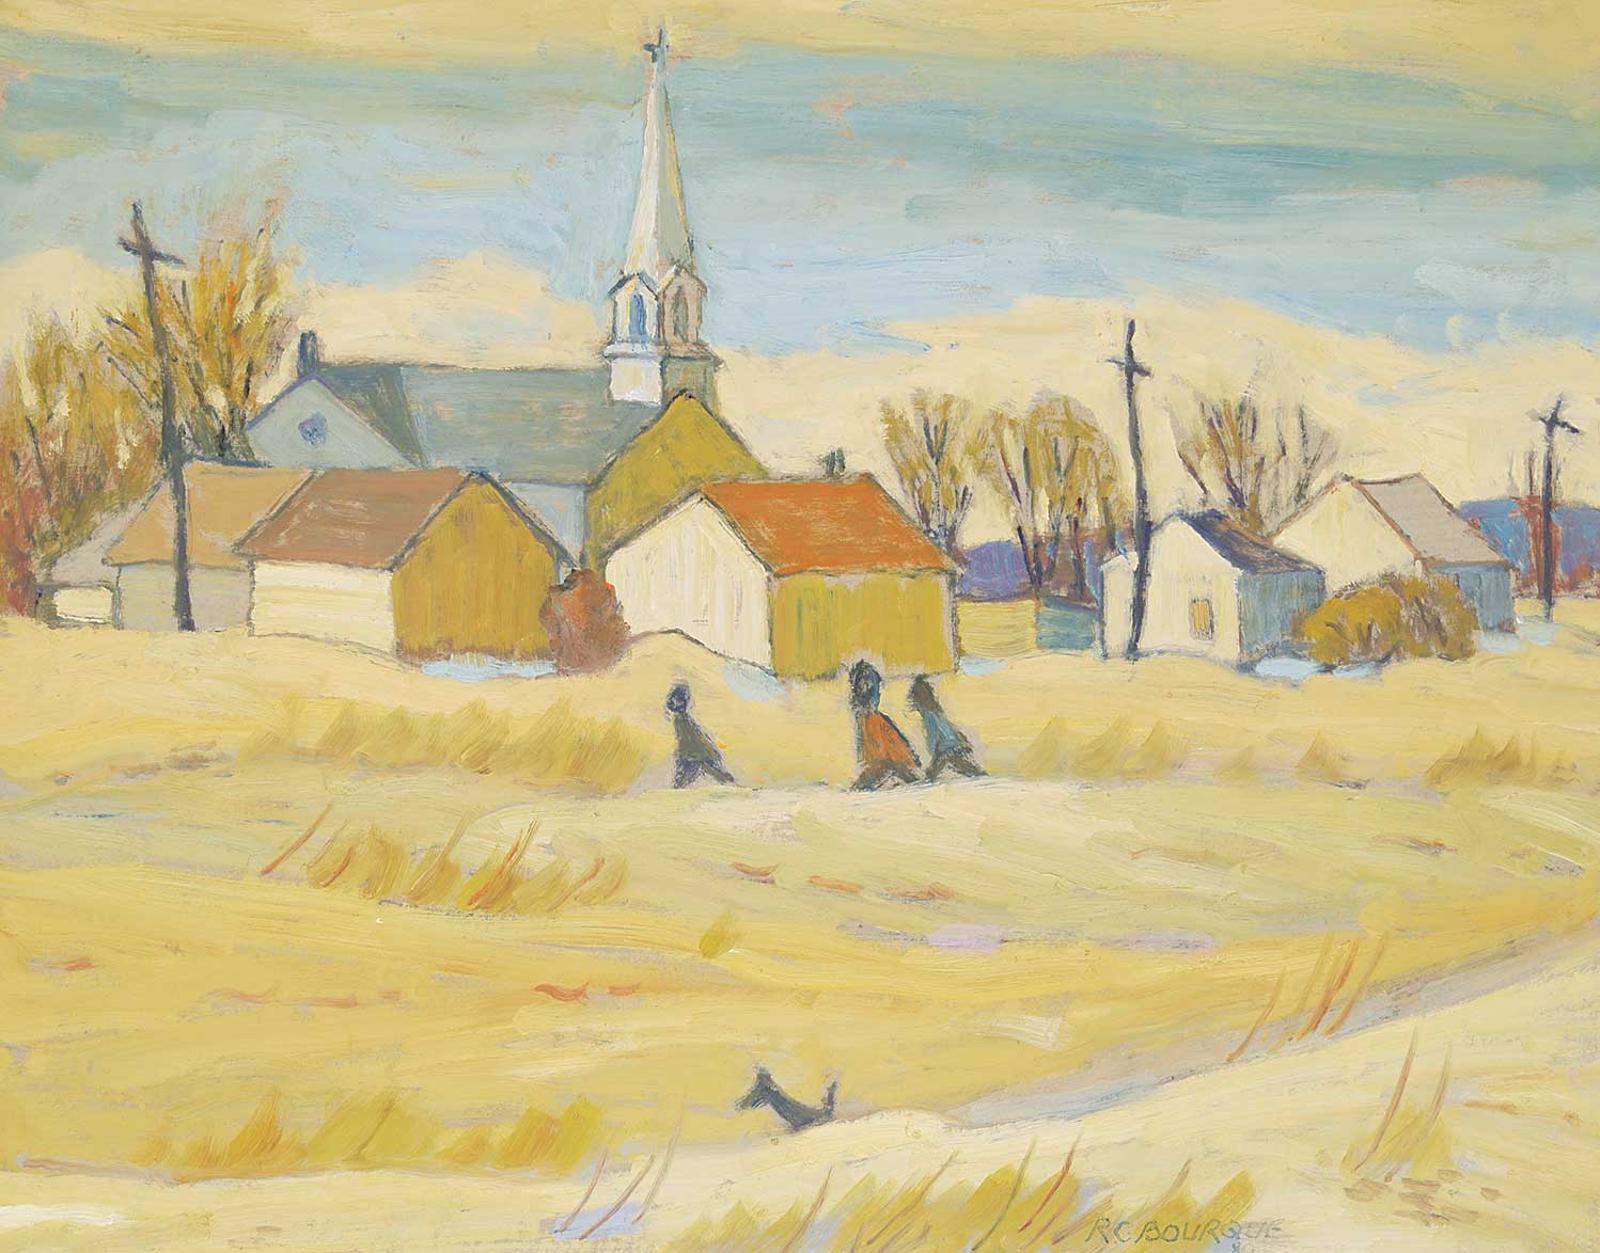 Raymond C. Bourque (1922-1982) - Untitled - Walking Home from School